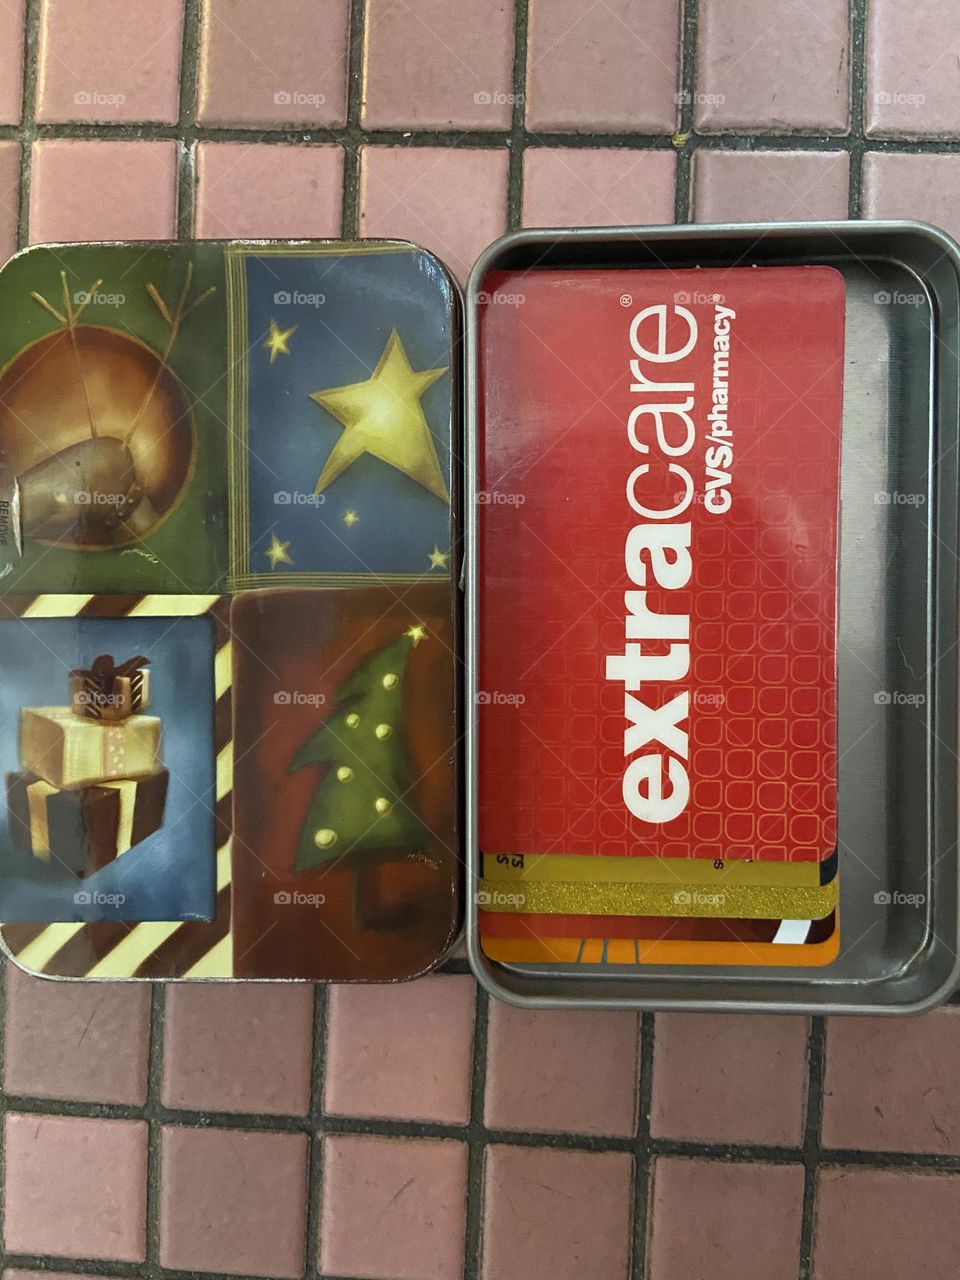 I use old gift card tin boxes to hold store loyalty cards, gift cards, membership cards, and credit cards. They also work great for holding change and folded currency, and don’t take up much space in a purse. This is a great way to repurpose them. 